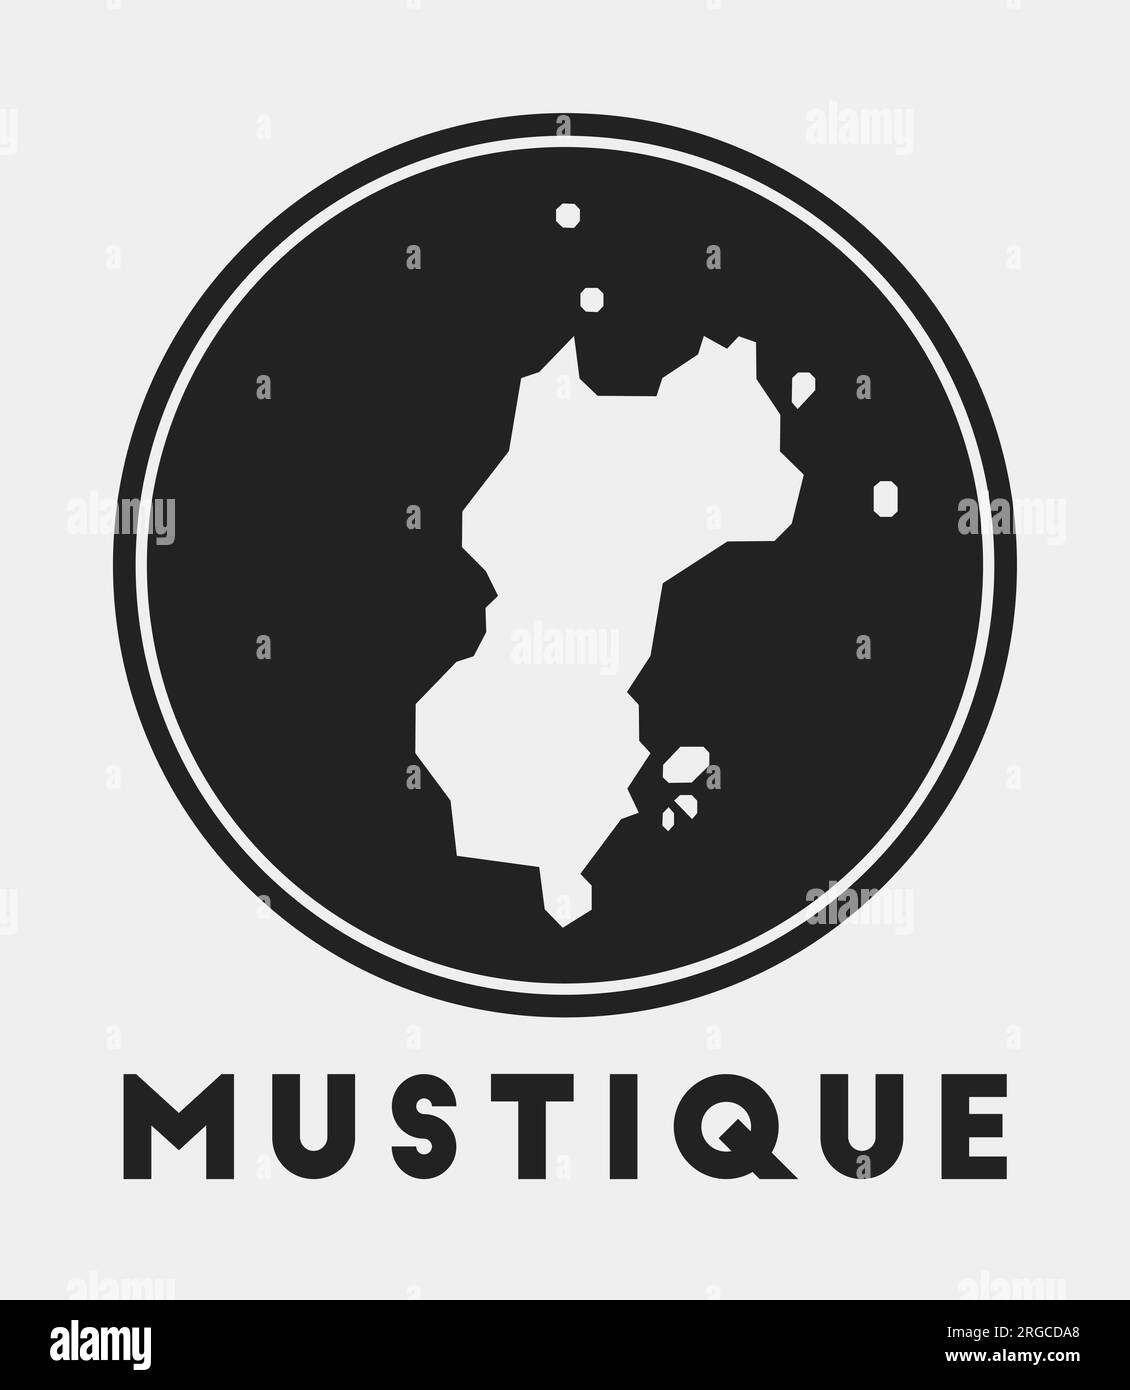 Mustique icon. Round logo with island map and title. Stylish Mustique ...